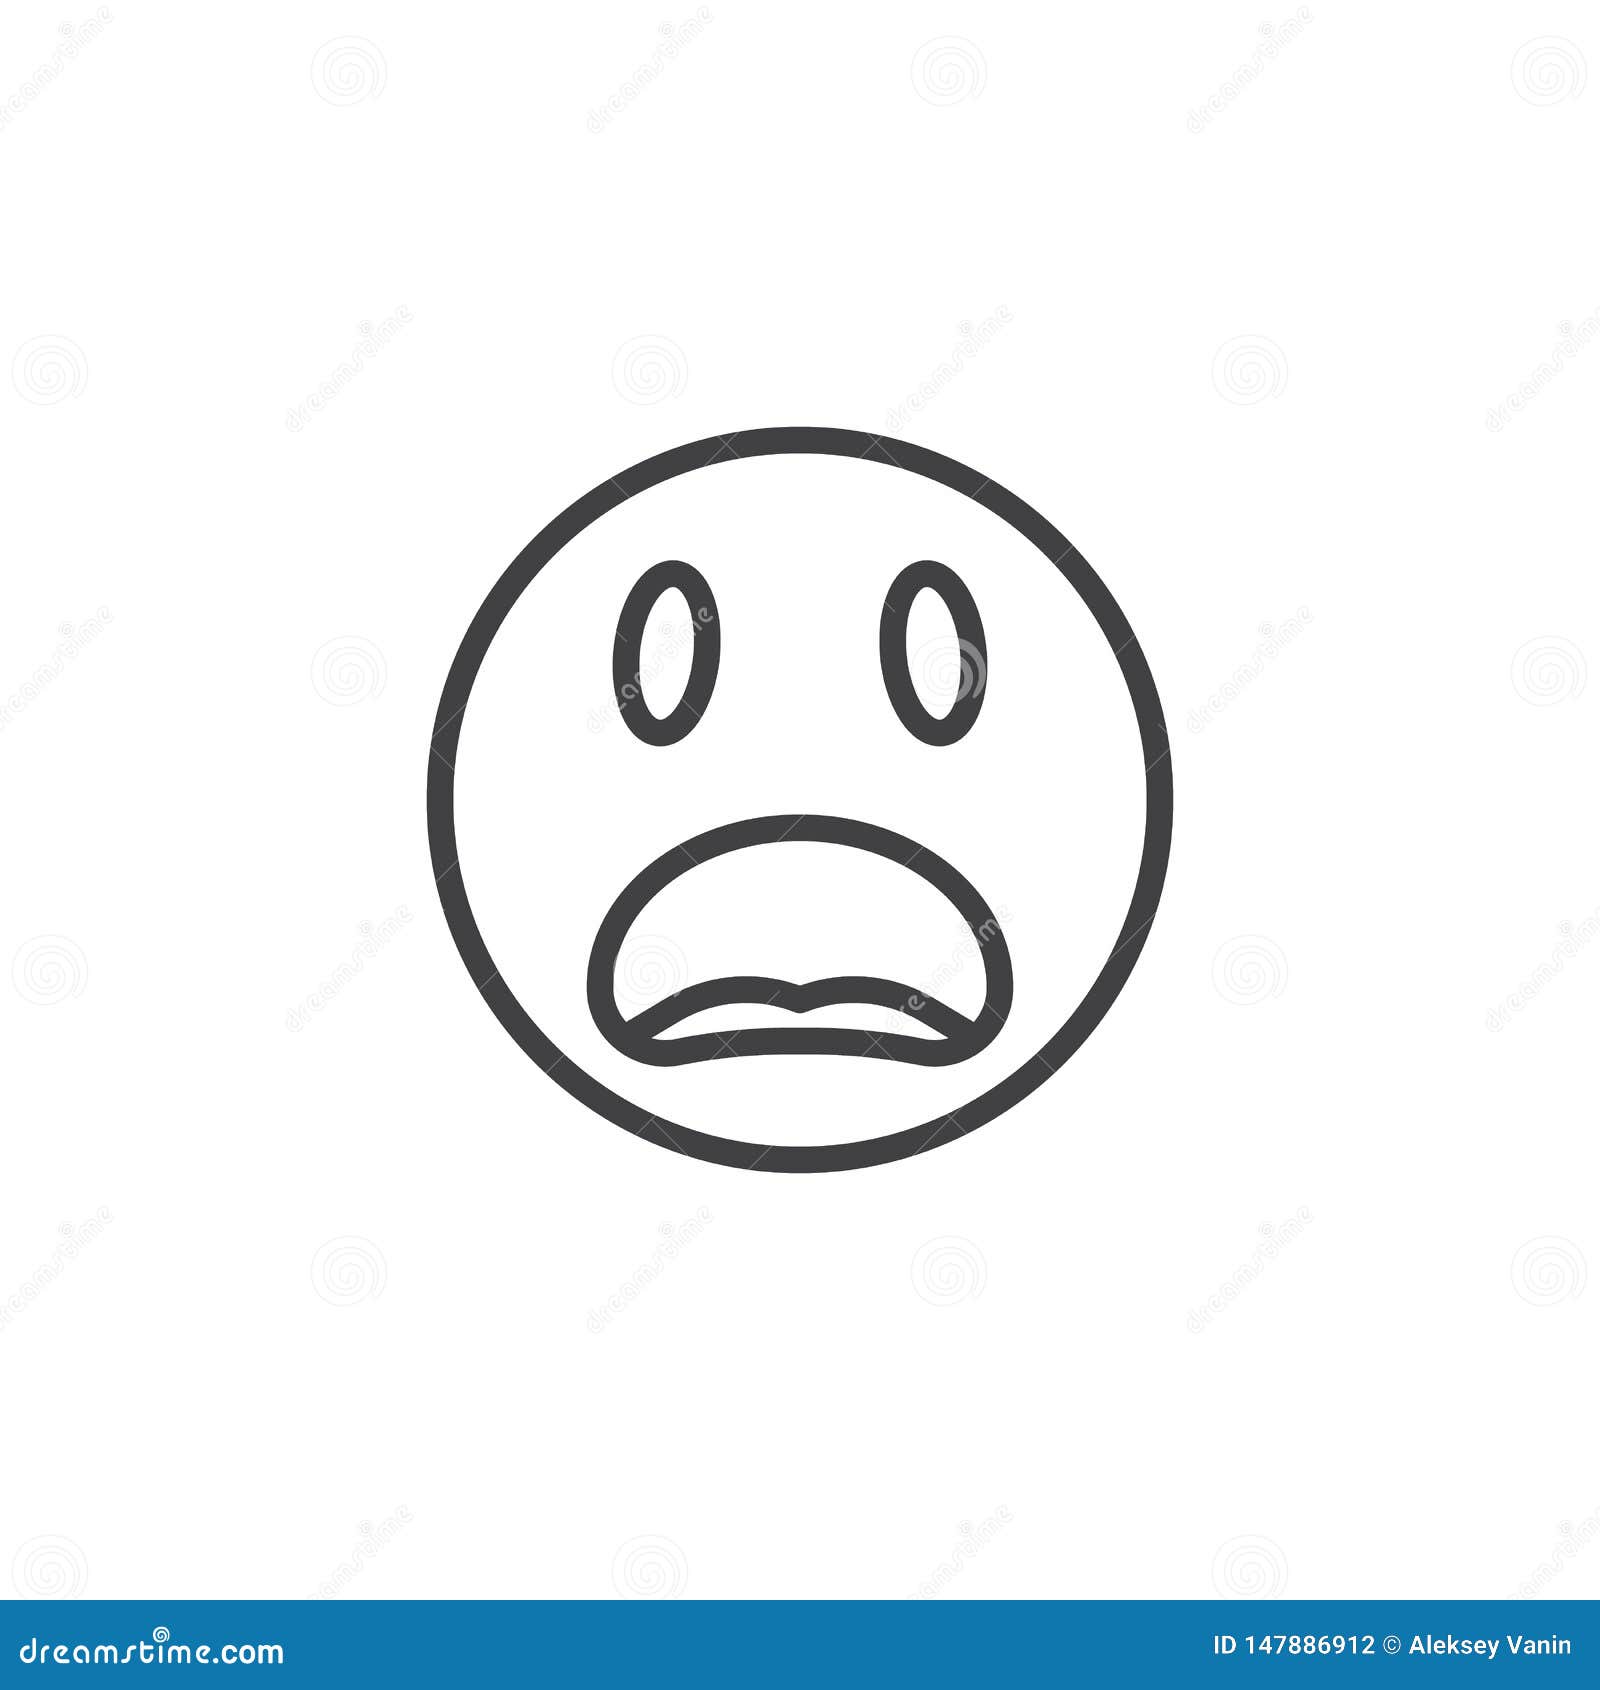 Cartoon face frightened or worry emoji, vector character scared